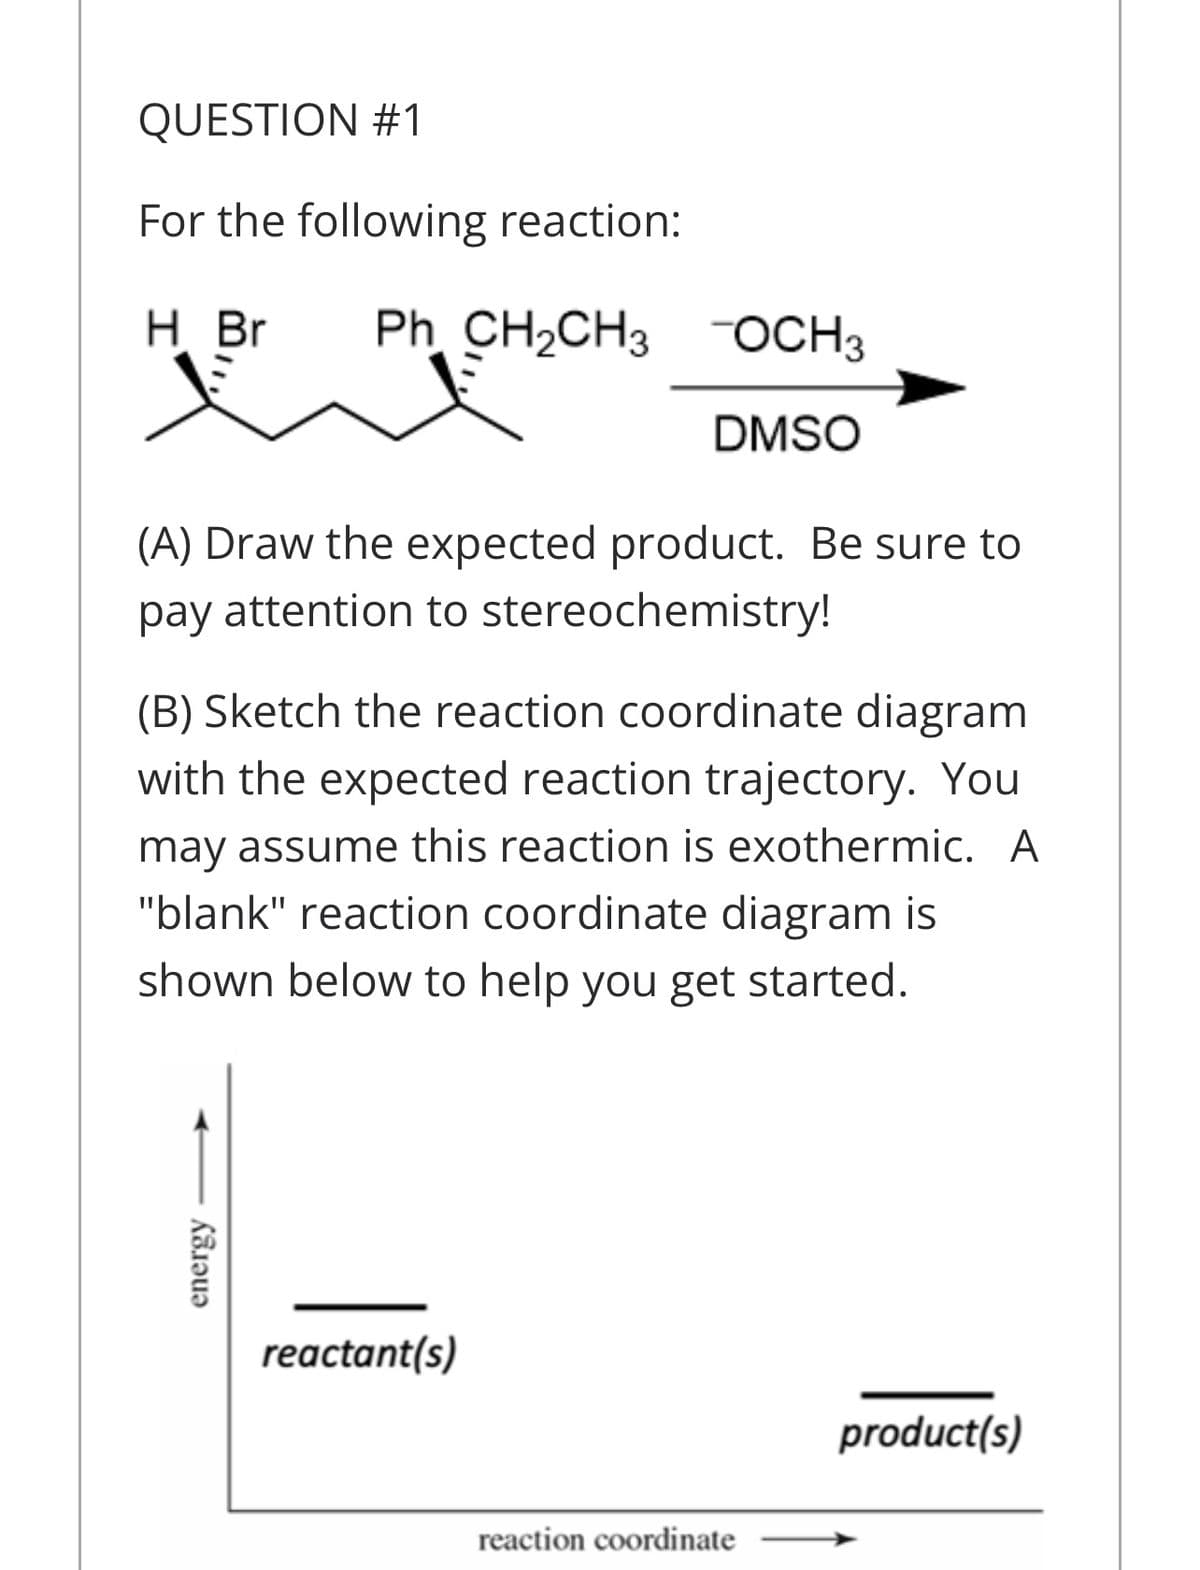 QUESTION #1
For the following reaction:
H Br
Ph CH2CH3 OCH3
DMSO
(A) Draw the expected product. Be sure to
pay attention to stereochemistry!
(B) Sketch the reaction coordinate diagram
with the expected reaction trajectory. You
may assume this reaction is exothermic. A
"blank" reaction coordinate diagram is
shown below to help you get started.
reactant(s)
product(s)
reaction coordinate
energy
